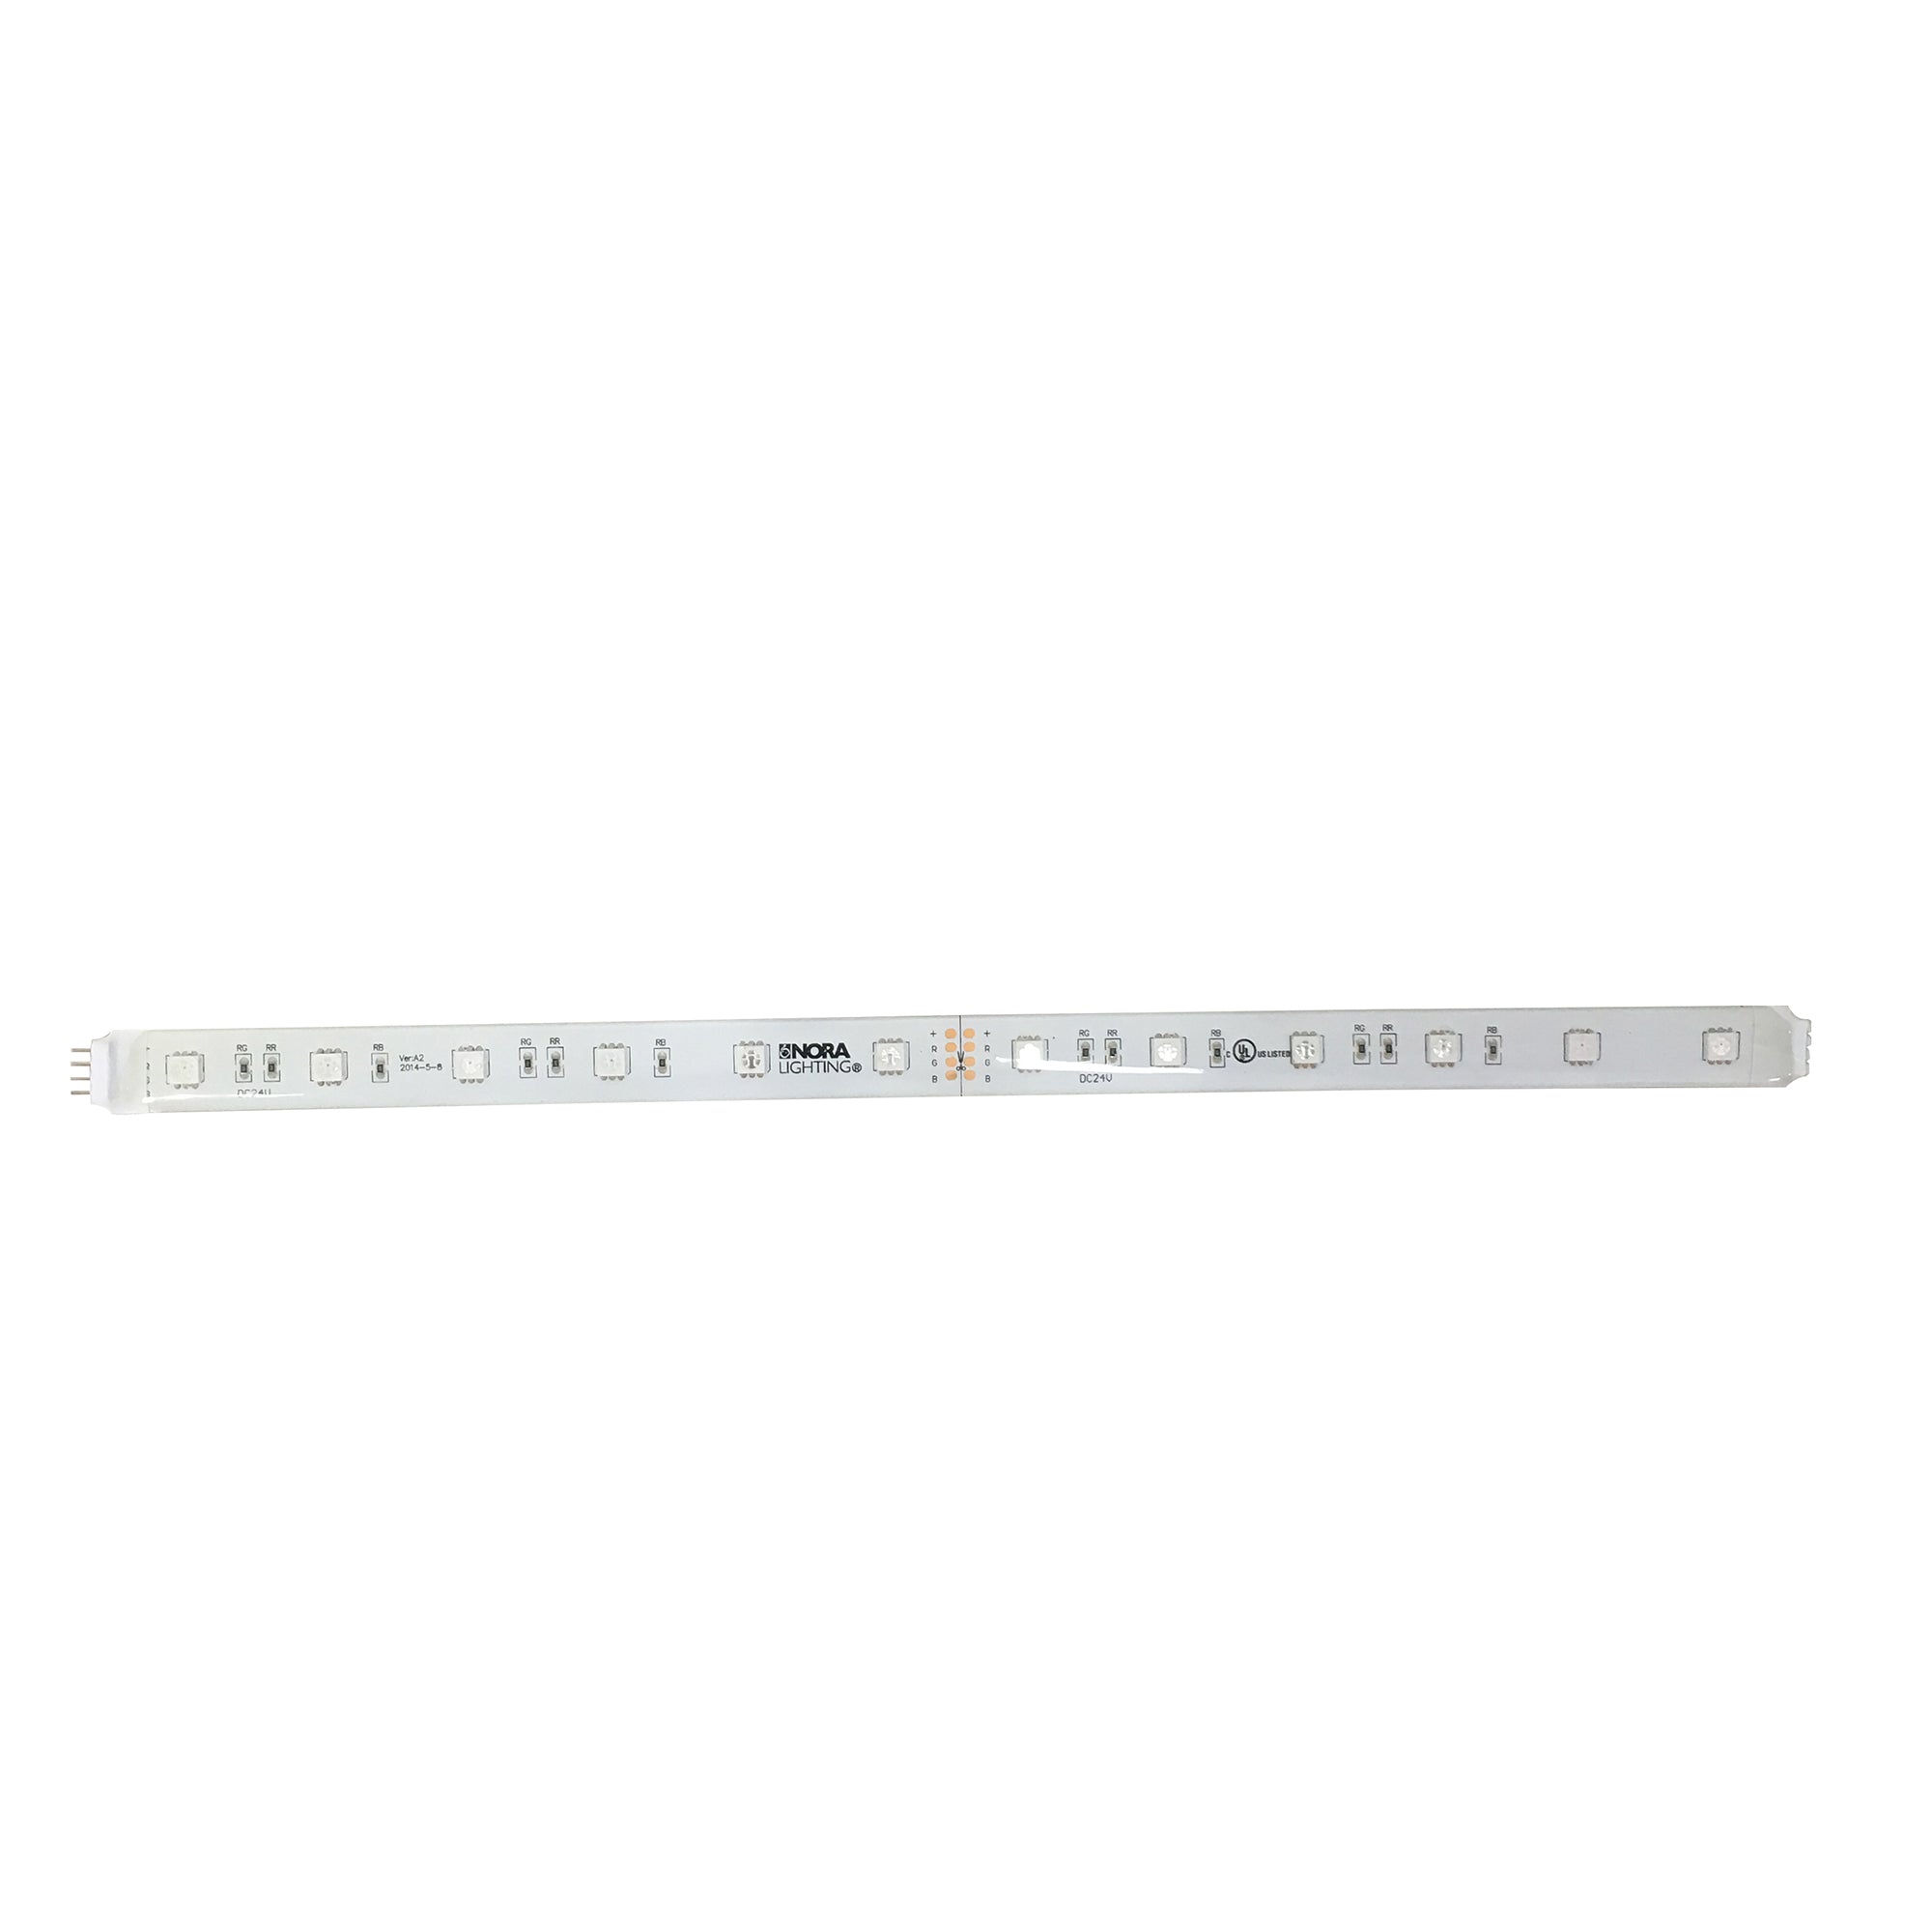 Nora Lighting NUTP3-WLEDRGB/12 - Accent / Undercabinet - 12 InchSECTION RGB WH LED TAPE LIG